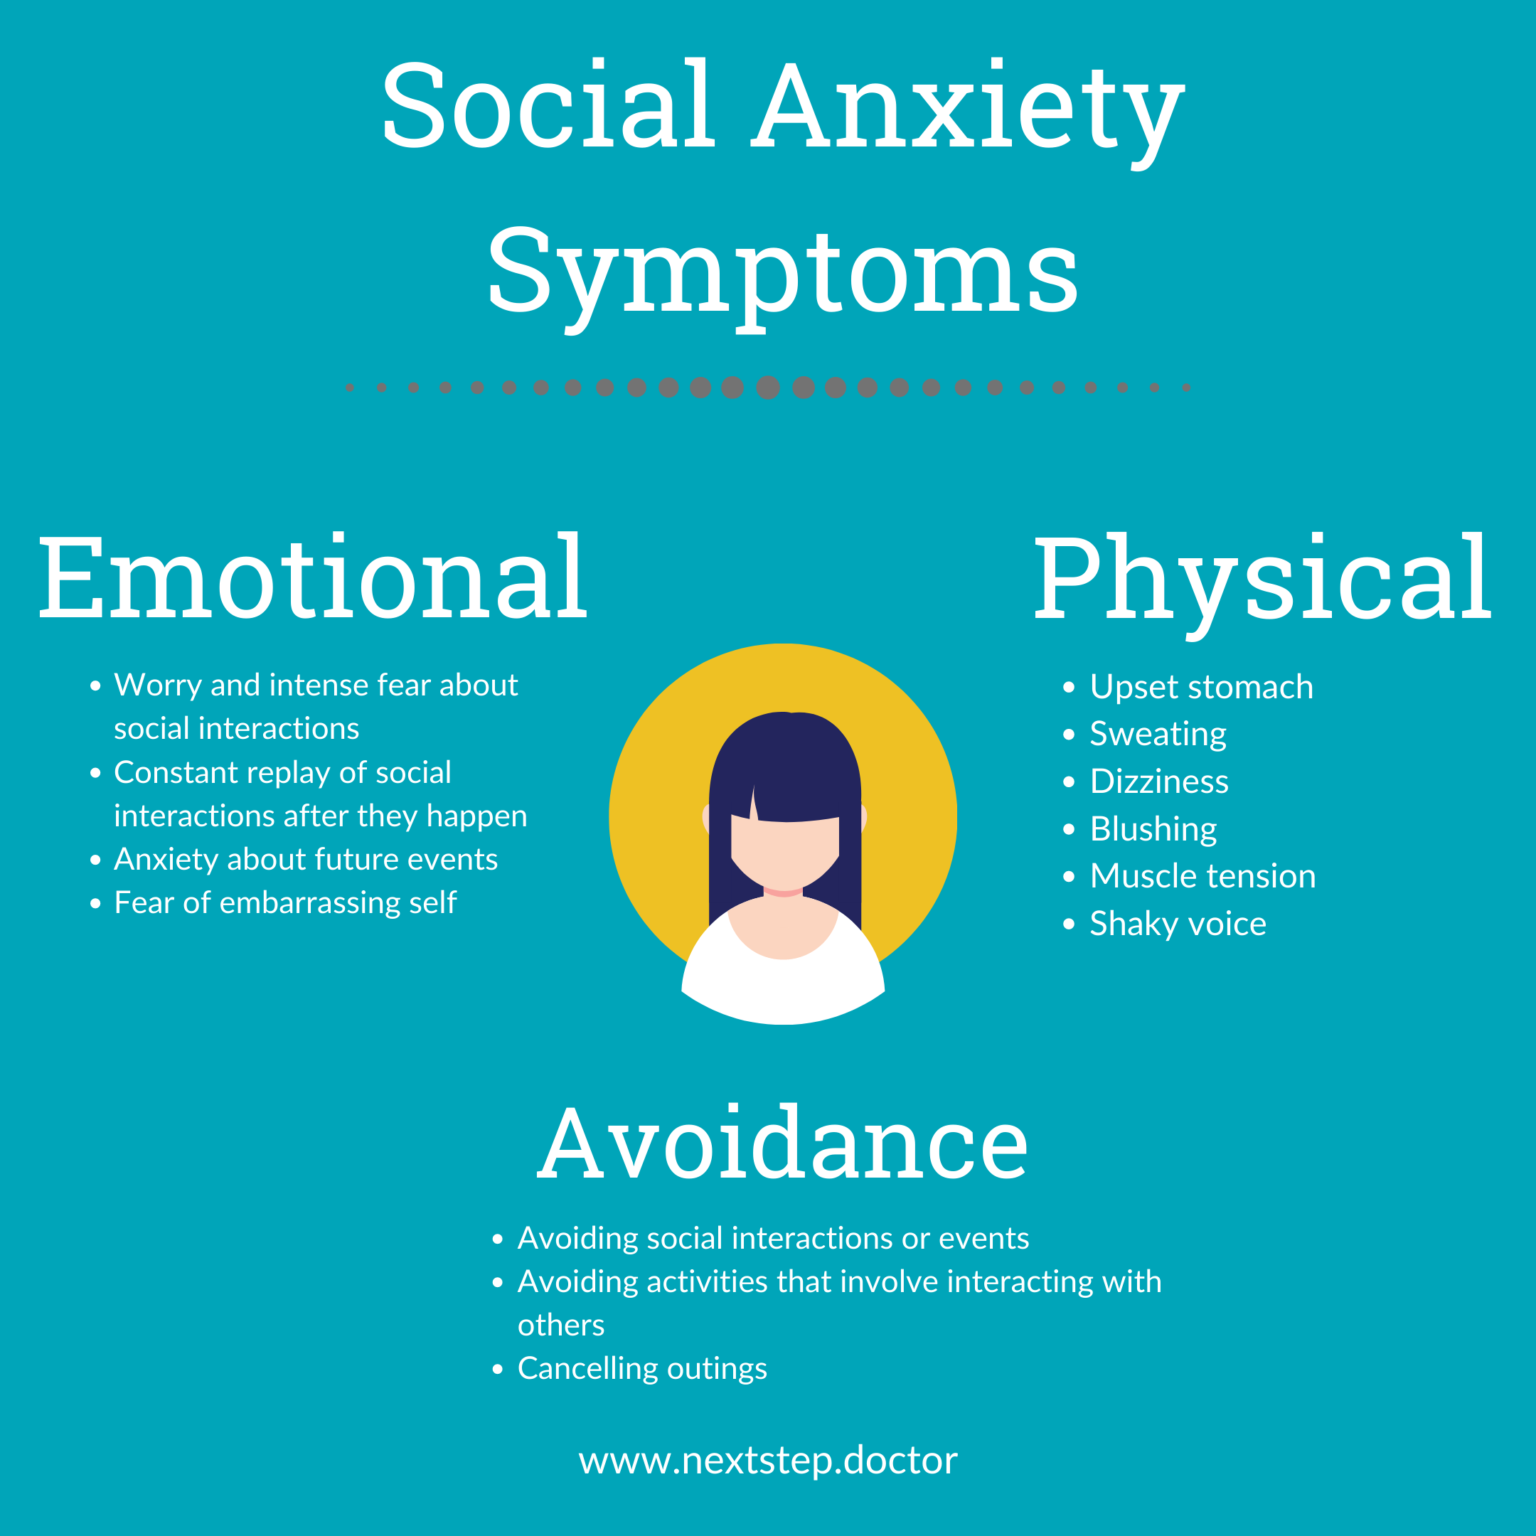 research articles social anxiety disorder